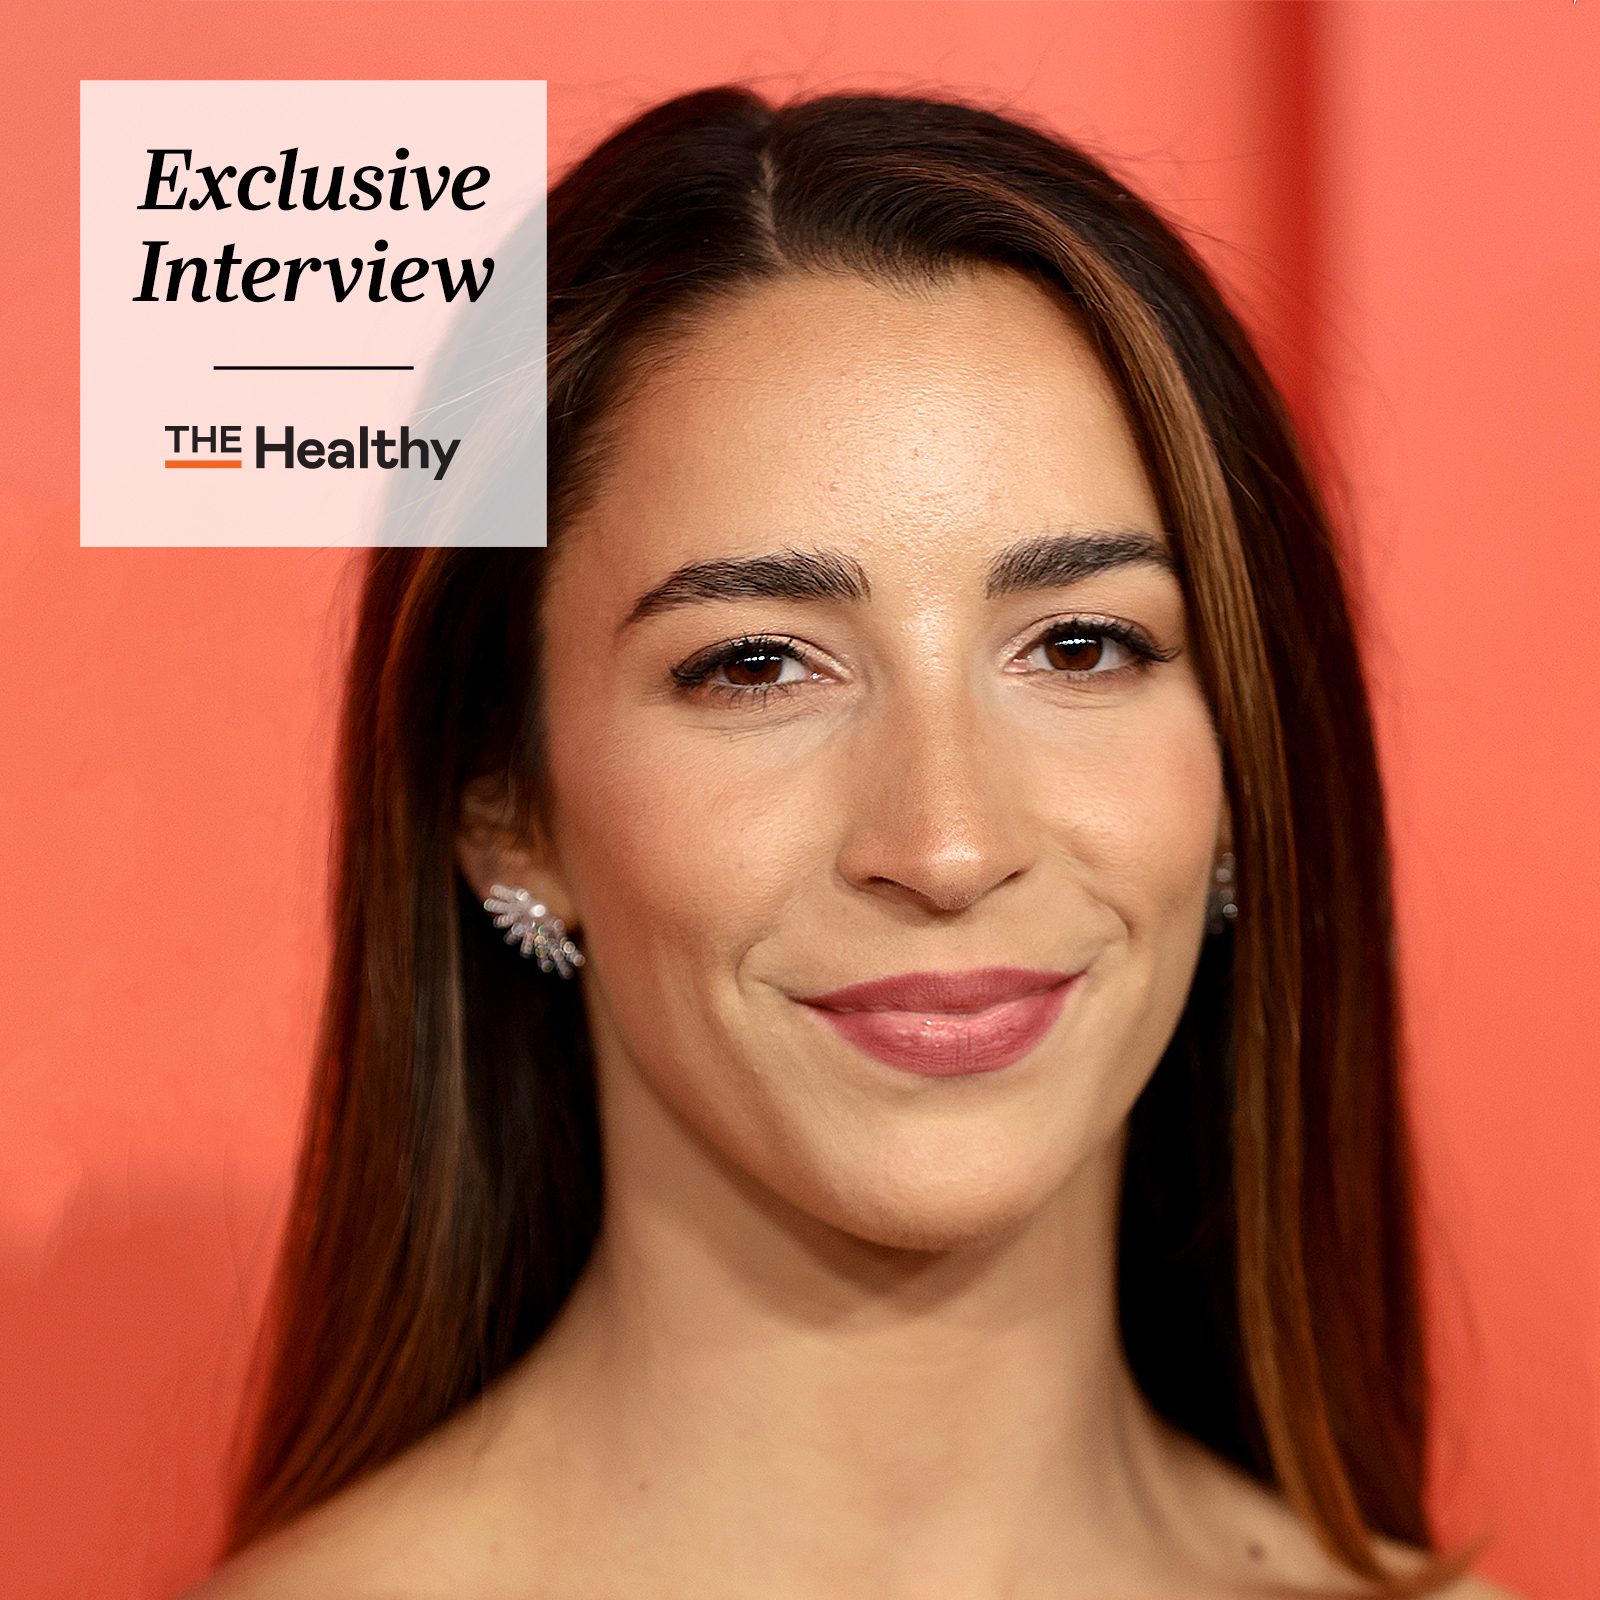 Olympic Gymnast Aly Raisman exclusive interview